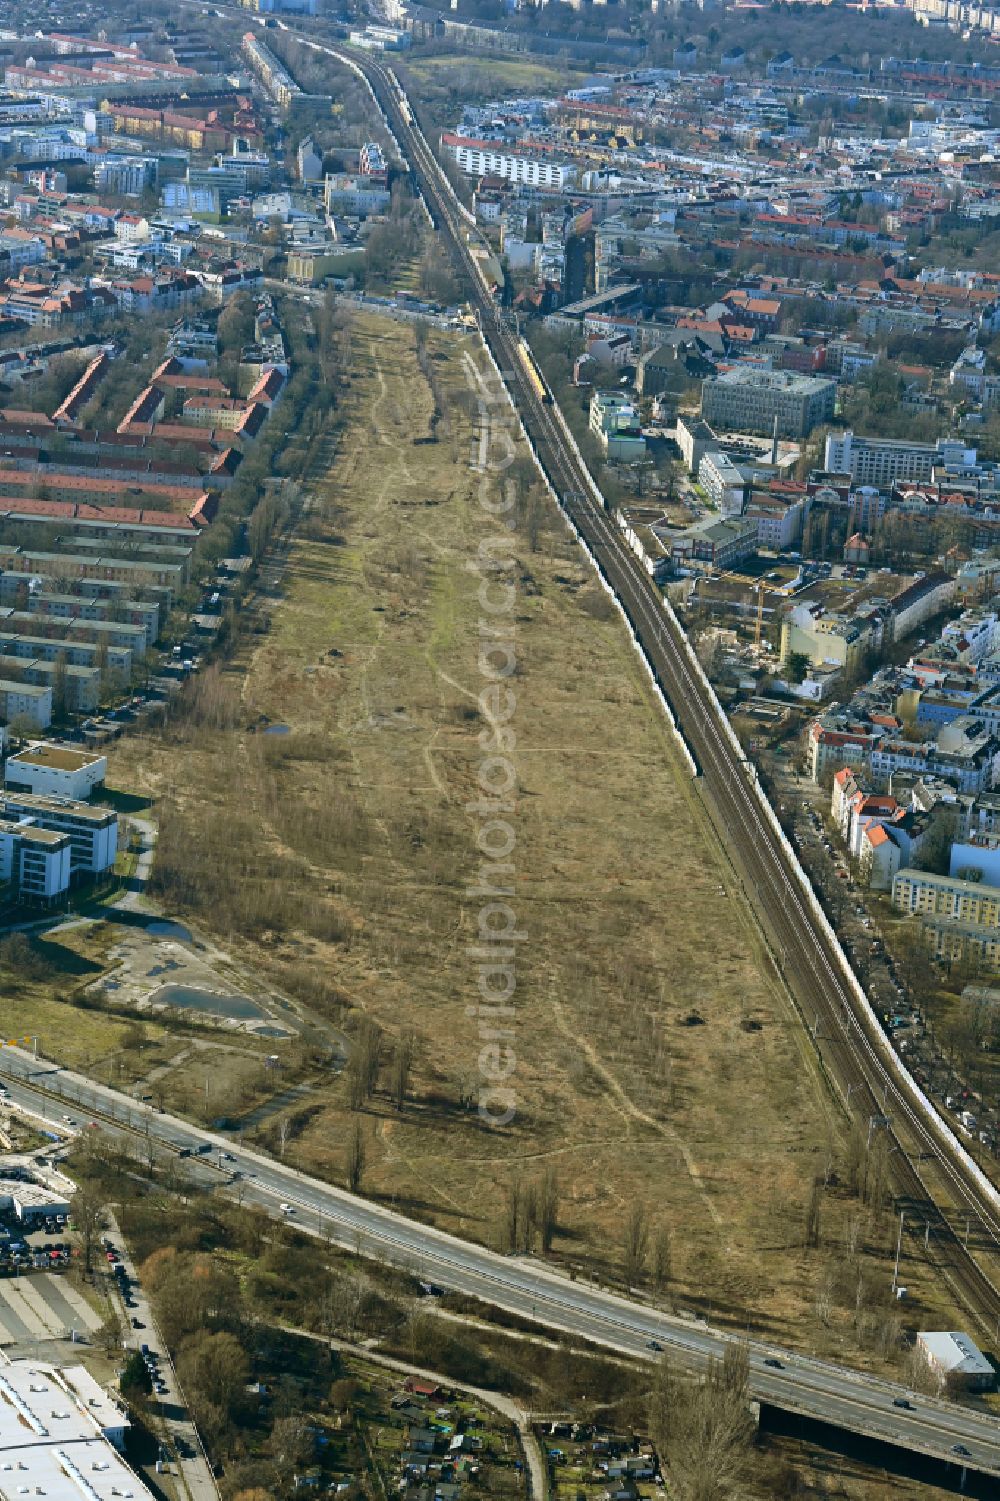 Aerial image Berlin - Development area of a??a??the disused and unused areas on the former marshalling yard of the Deutsche Bahn between Damerowstrasse, Granitzstrasse and Muehlenstrasse to the new city quarter Pankower Tor in Berlin, Germany